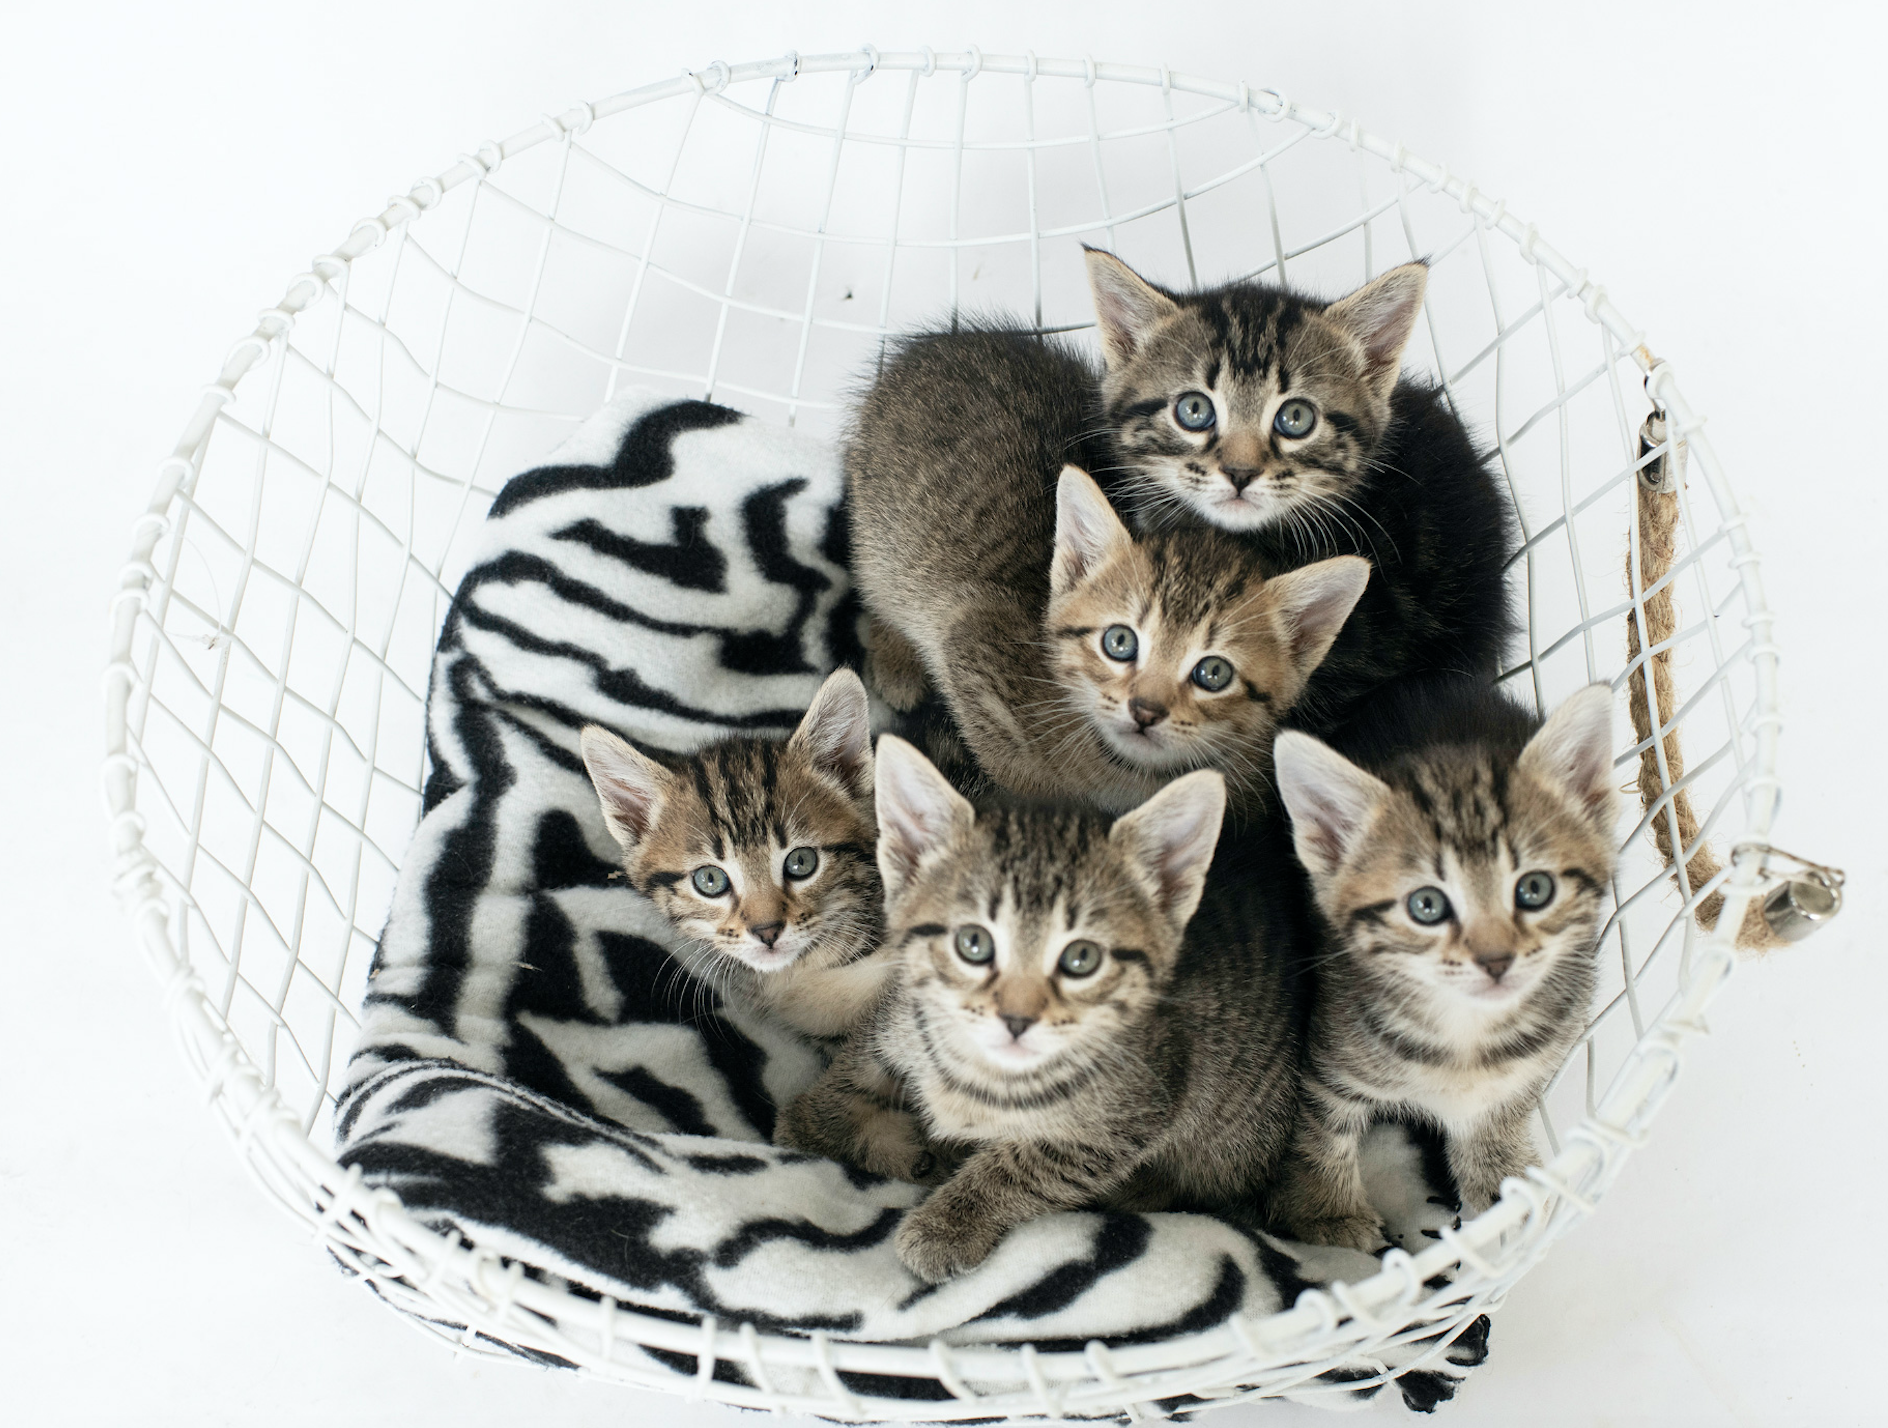 Found Kittens? Here’s What To Do